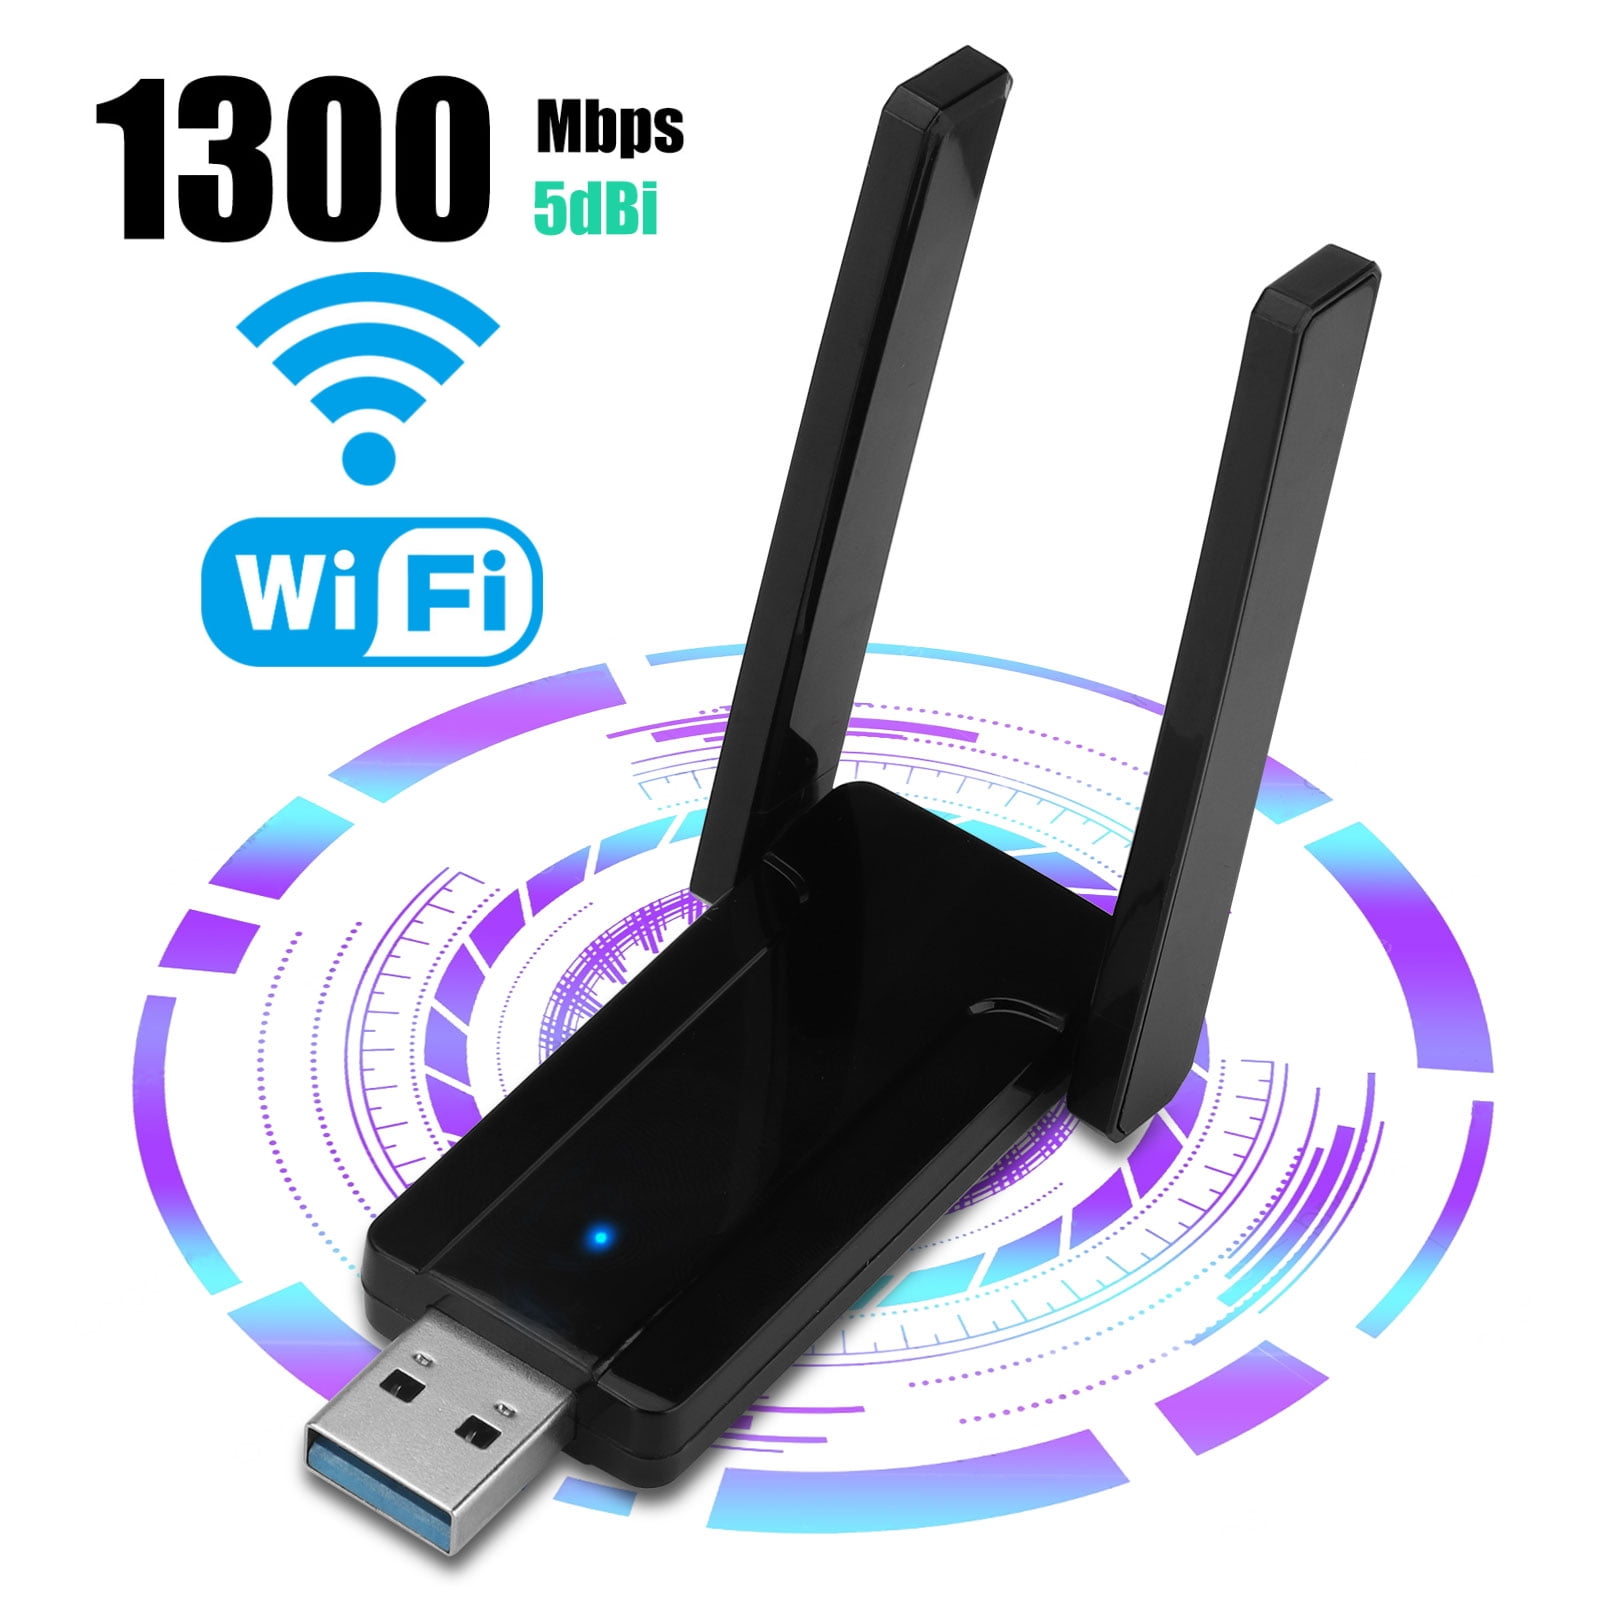 native Beloved eternally USB WiFi Adapter for PC, AC 1300Mbps USB 3.0 Wireless Network Dongle Adapter  with 2*5dBi Dual Band 2.4G/5GHz High Gain Antennas for Laptop Desktop  Windows 10//8/7/XP/Vista, Linux, Mac OS 10.9-10.15 - Walmart.com